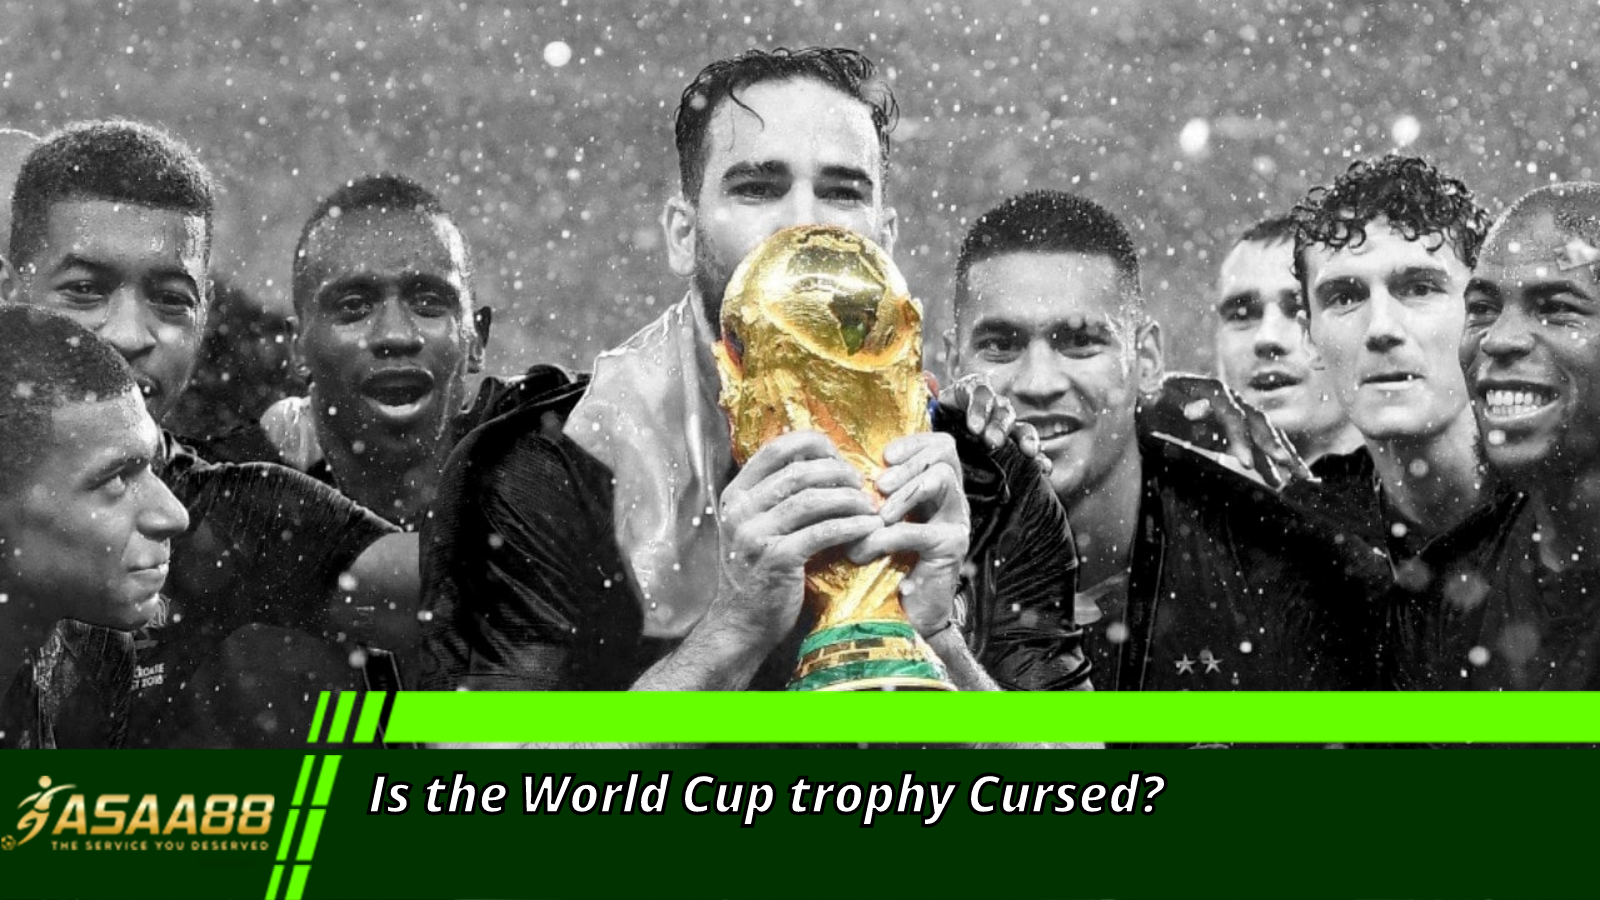 World Cup trophy Cursed?